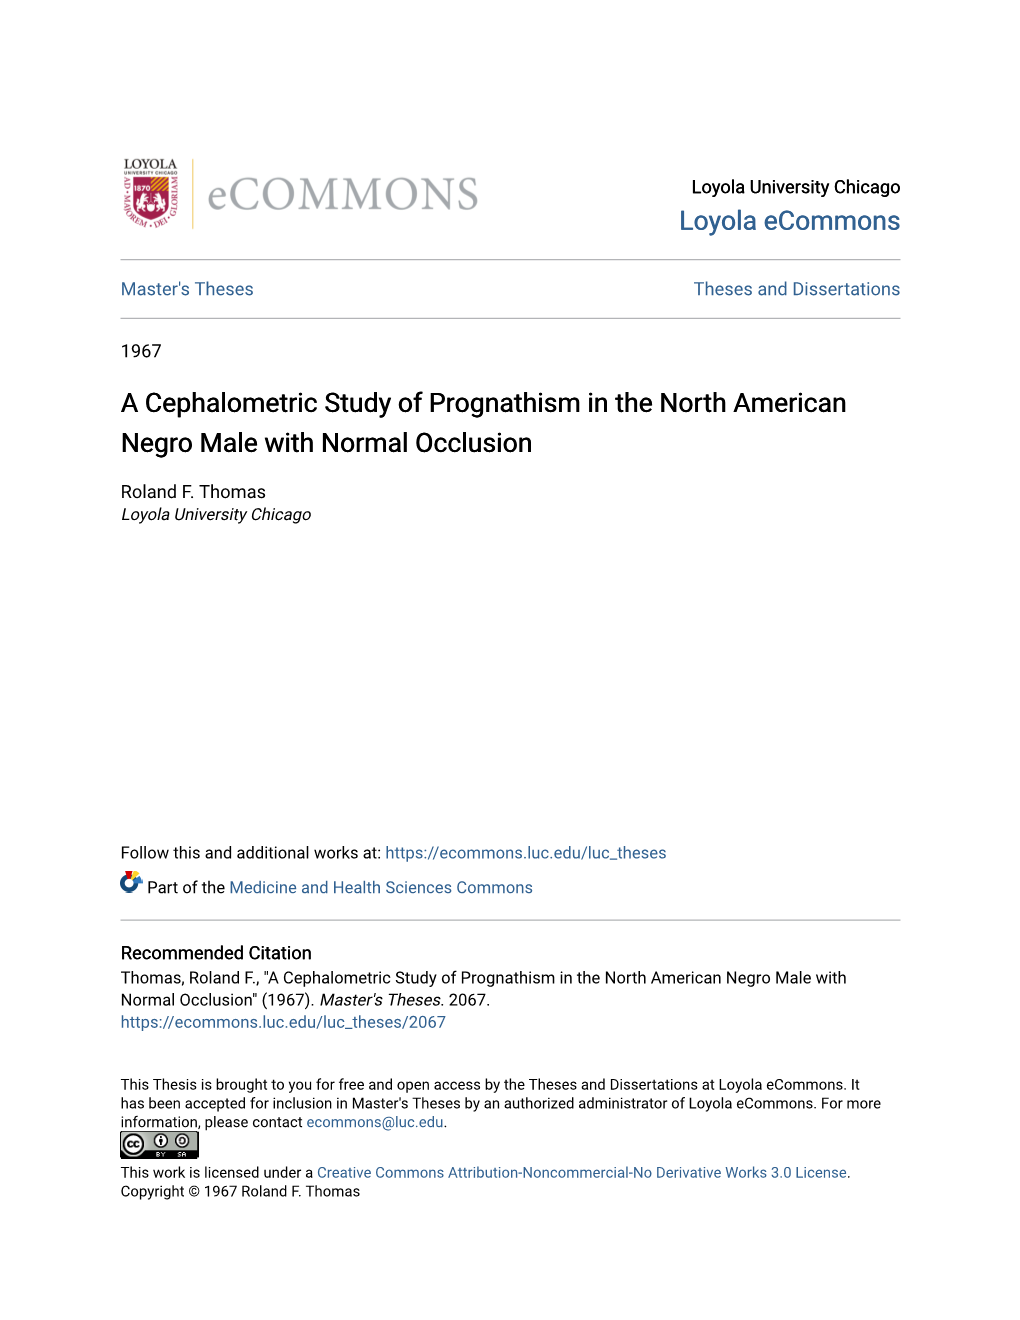 A Cephalometric Study of Prognathism in the North American Negro Male with Normal Occlusion